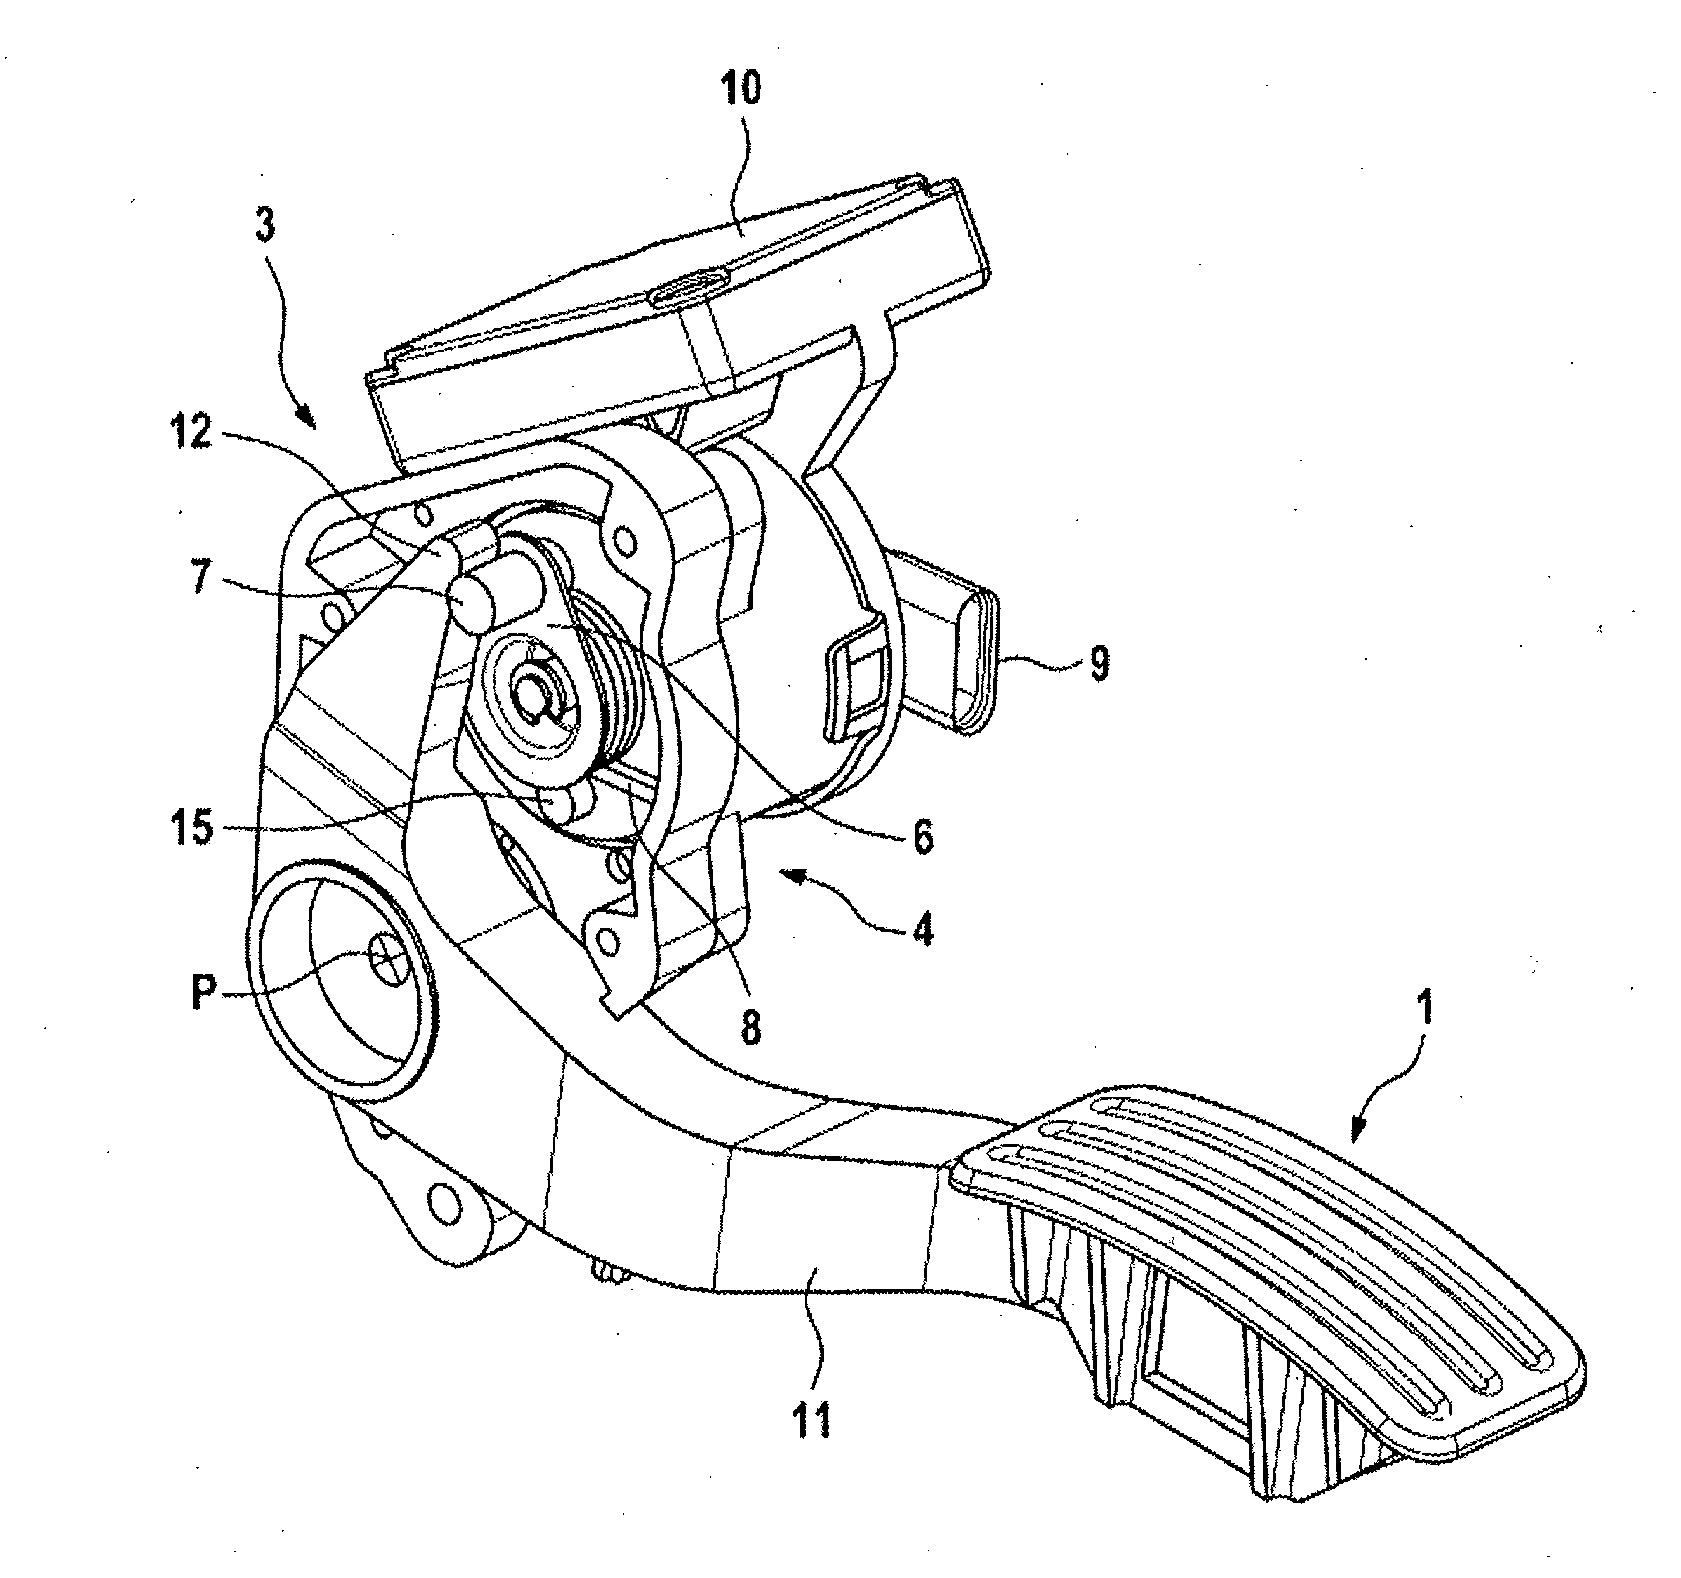 Method for operating an accelerator pedal unit for motor vehicles